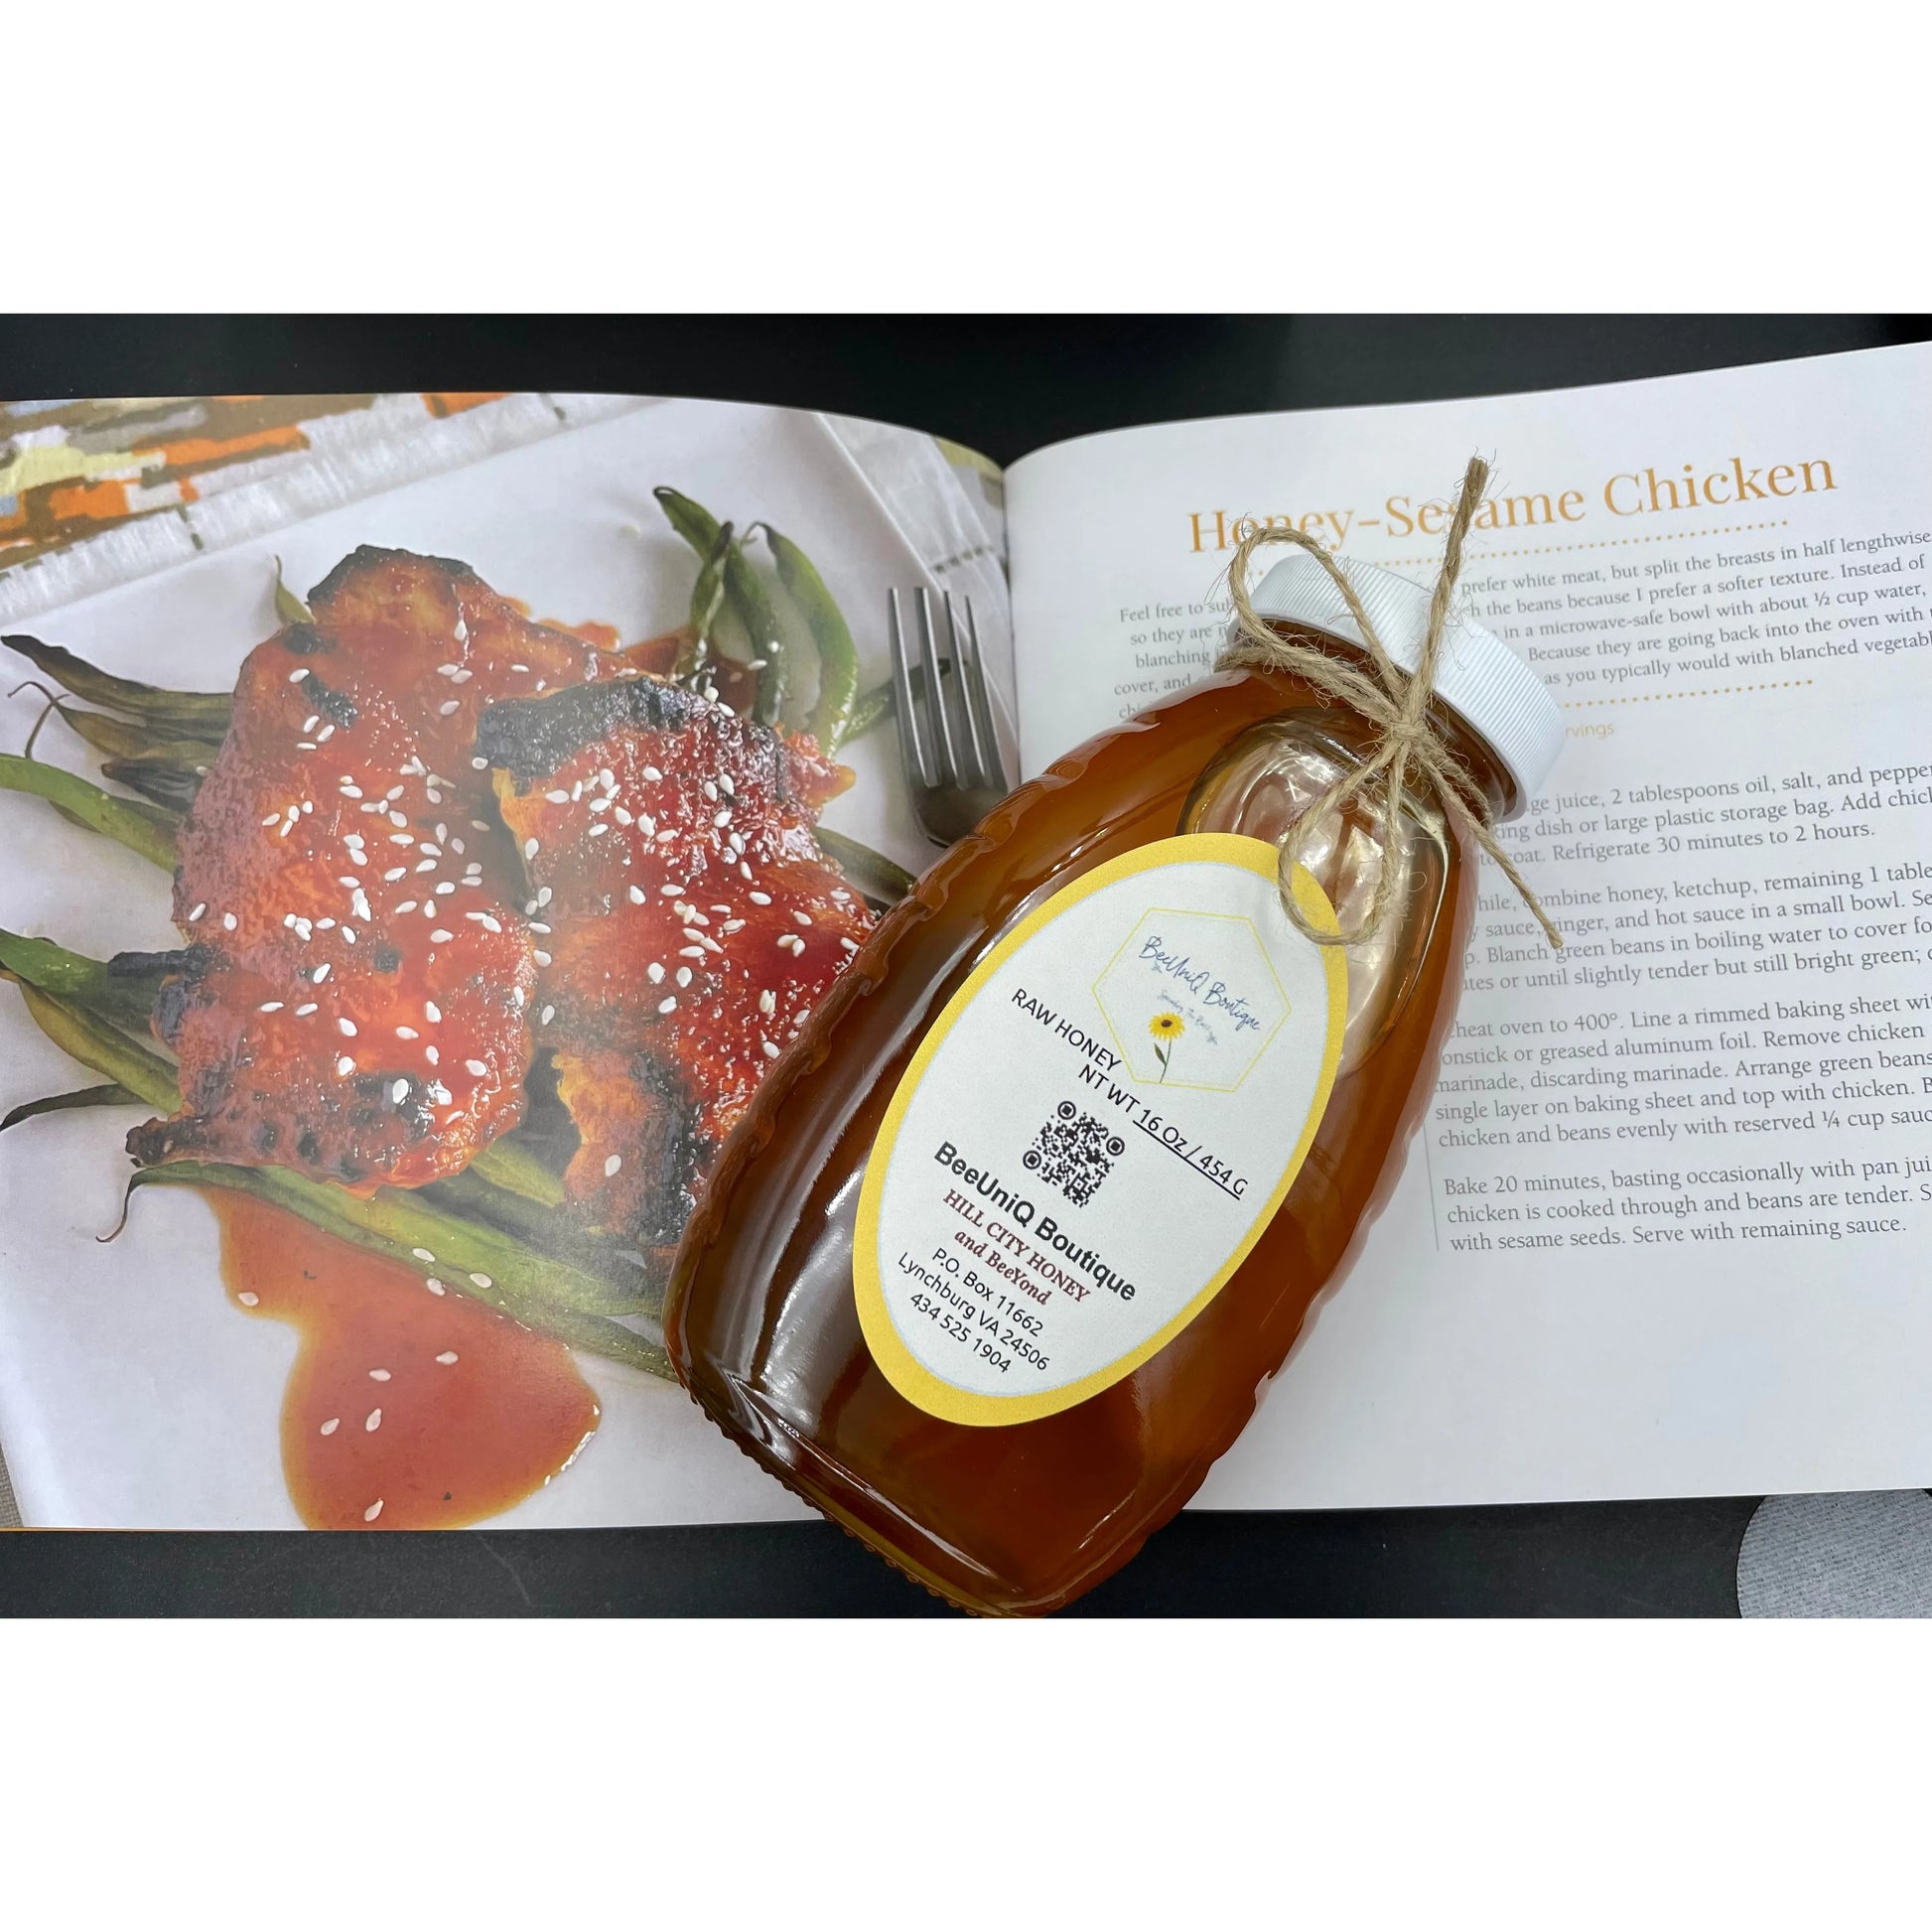 Honey bottle on page with a recipe.